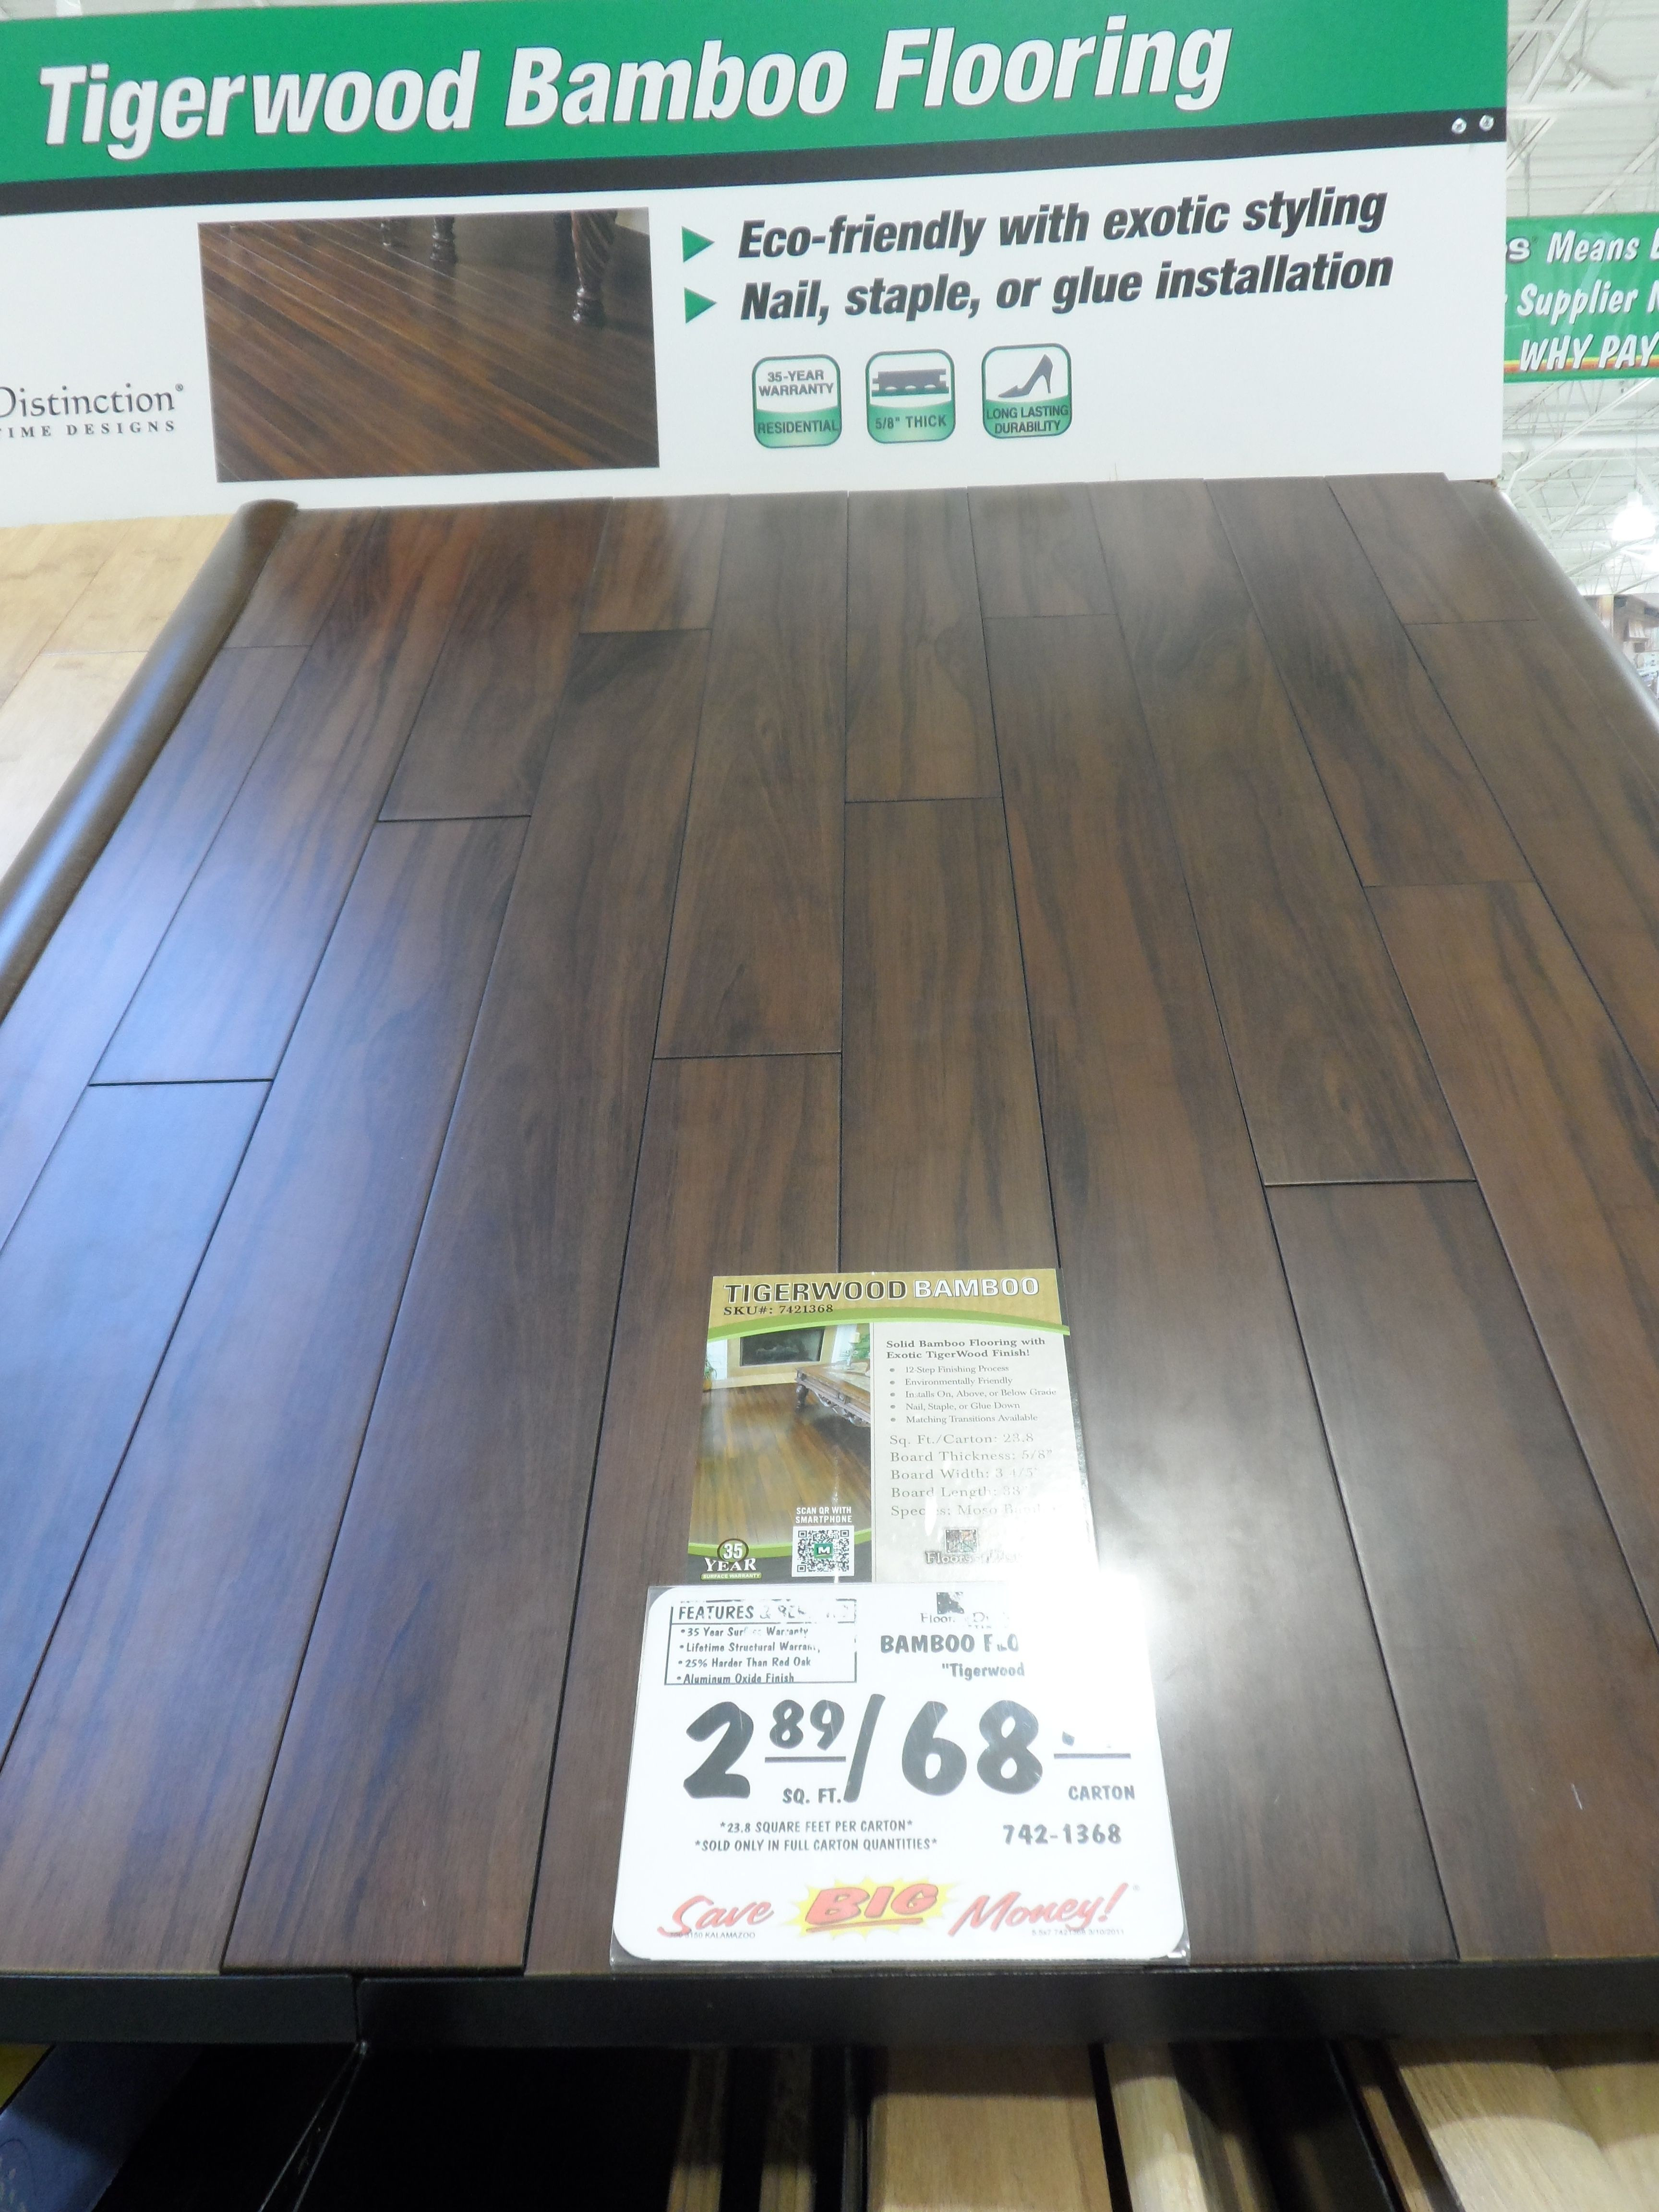 17 Unique 5 Inch Hardwood Flooring Cupping 2024 free download 5 inch hardwood flooring cupping of 18 fresh how much is bamboo flooring pictures dizpos com throughout how much is bamboo flooring unique tigerwood bamboo flooring menards flooring pinteres